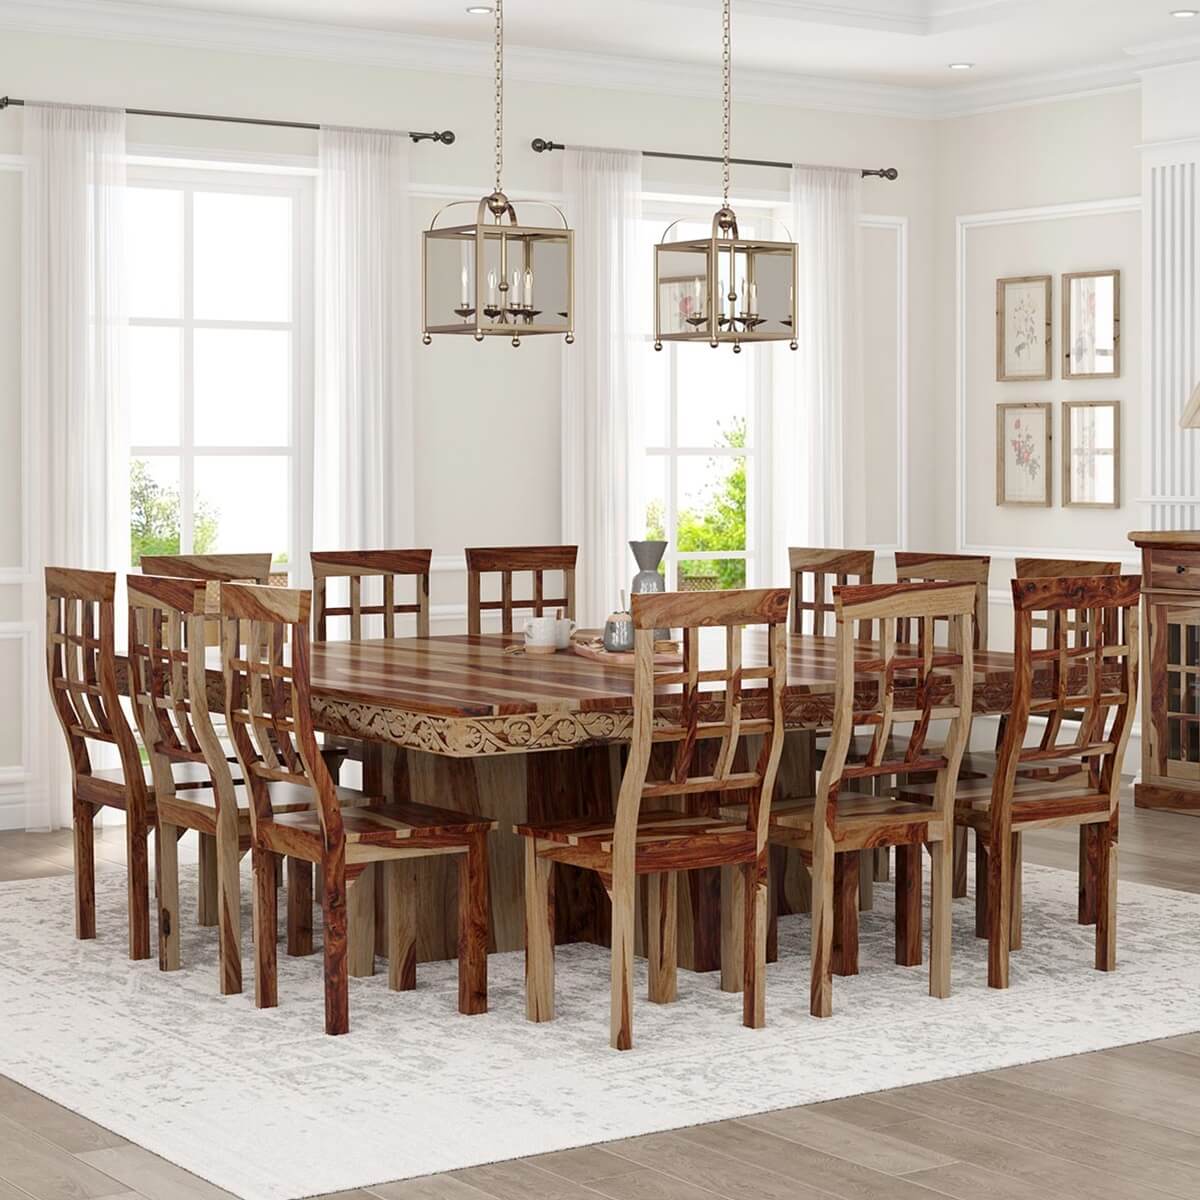 Dallas Ranch Solid Wood Square Dining Room Table Set.